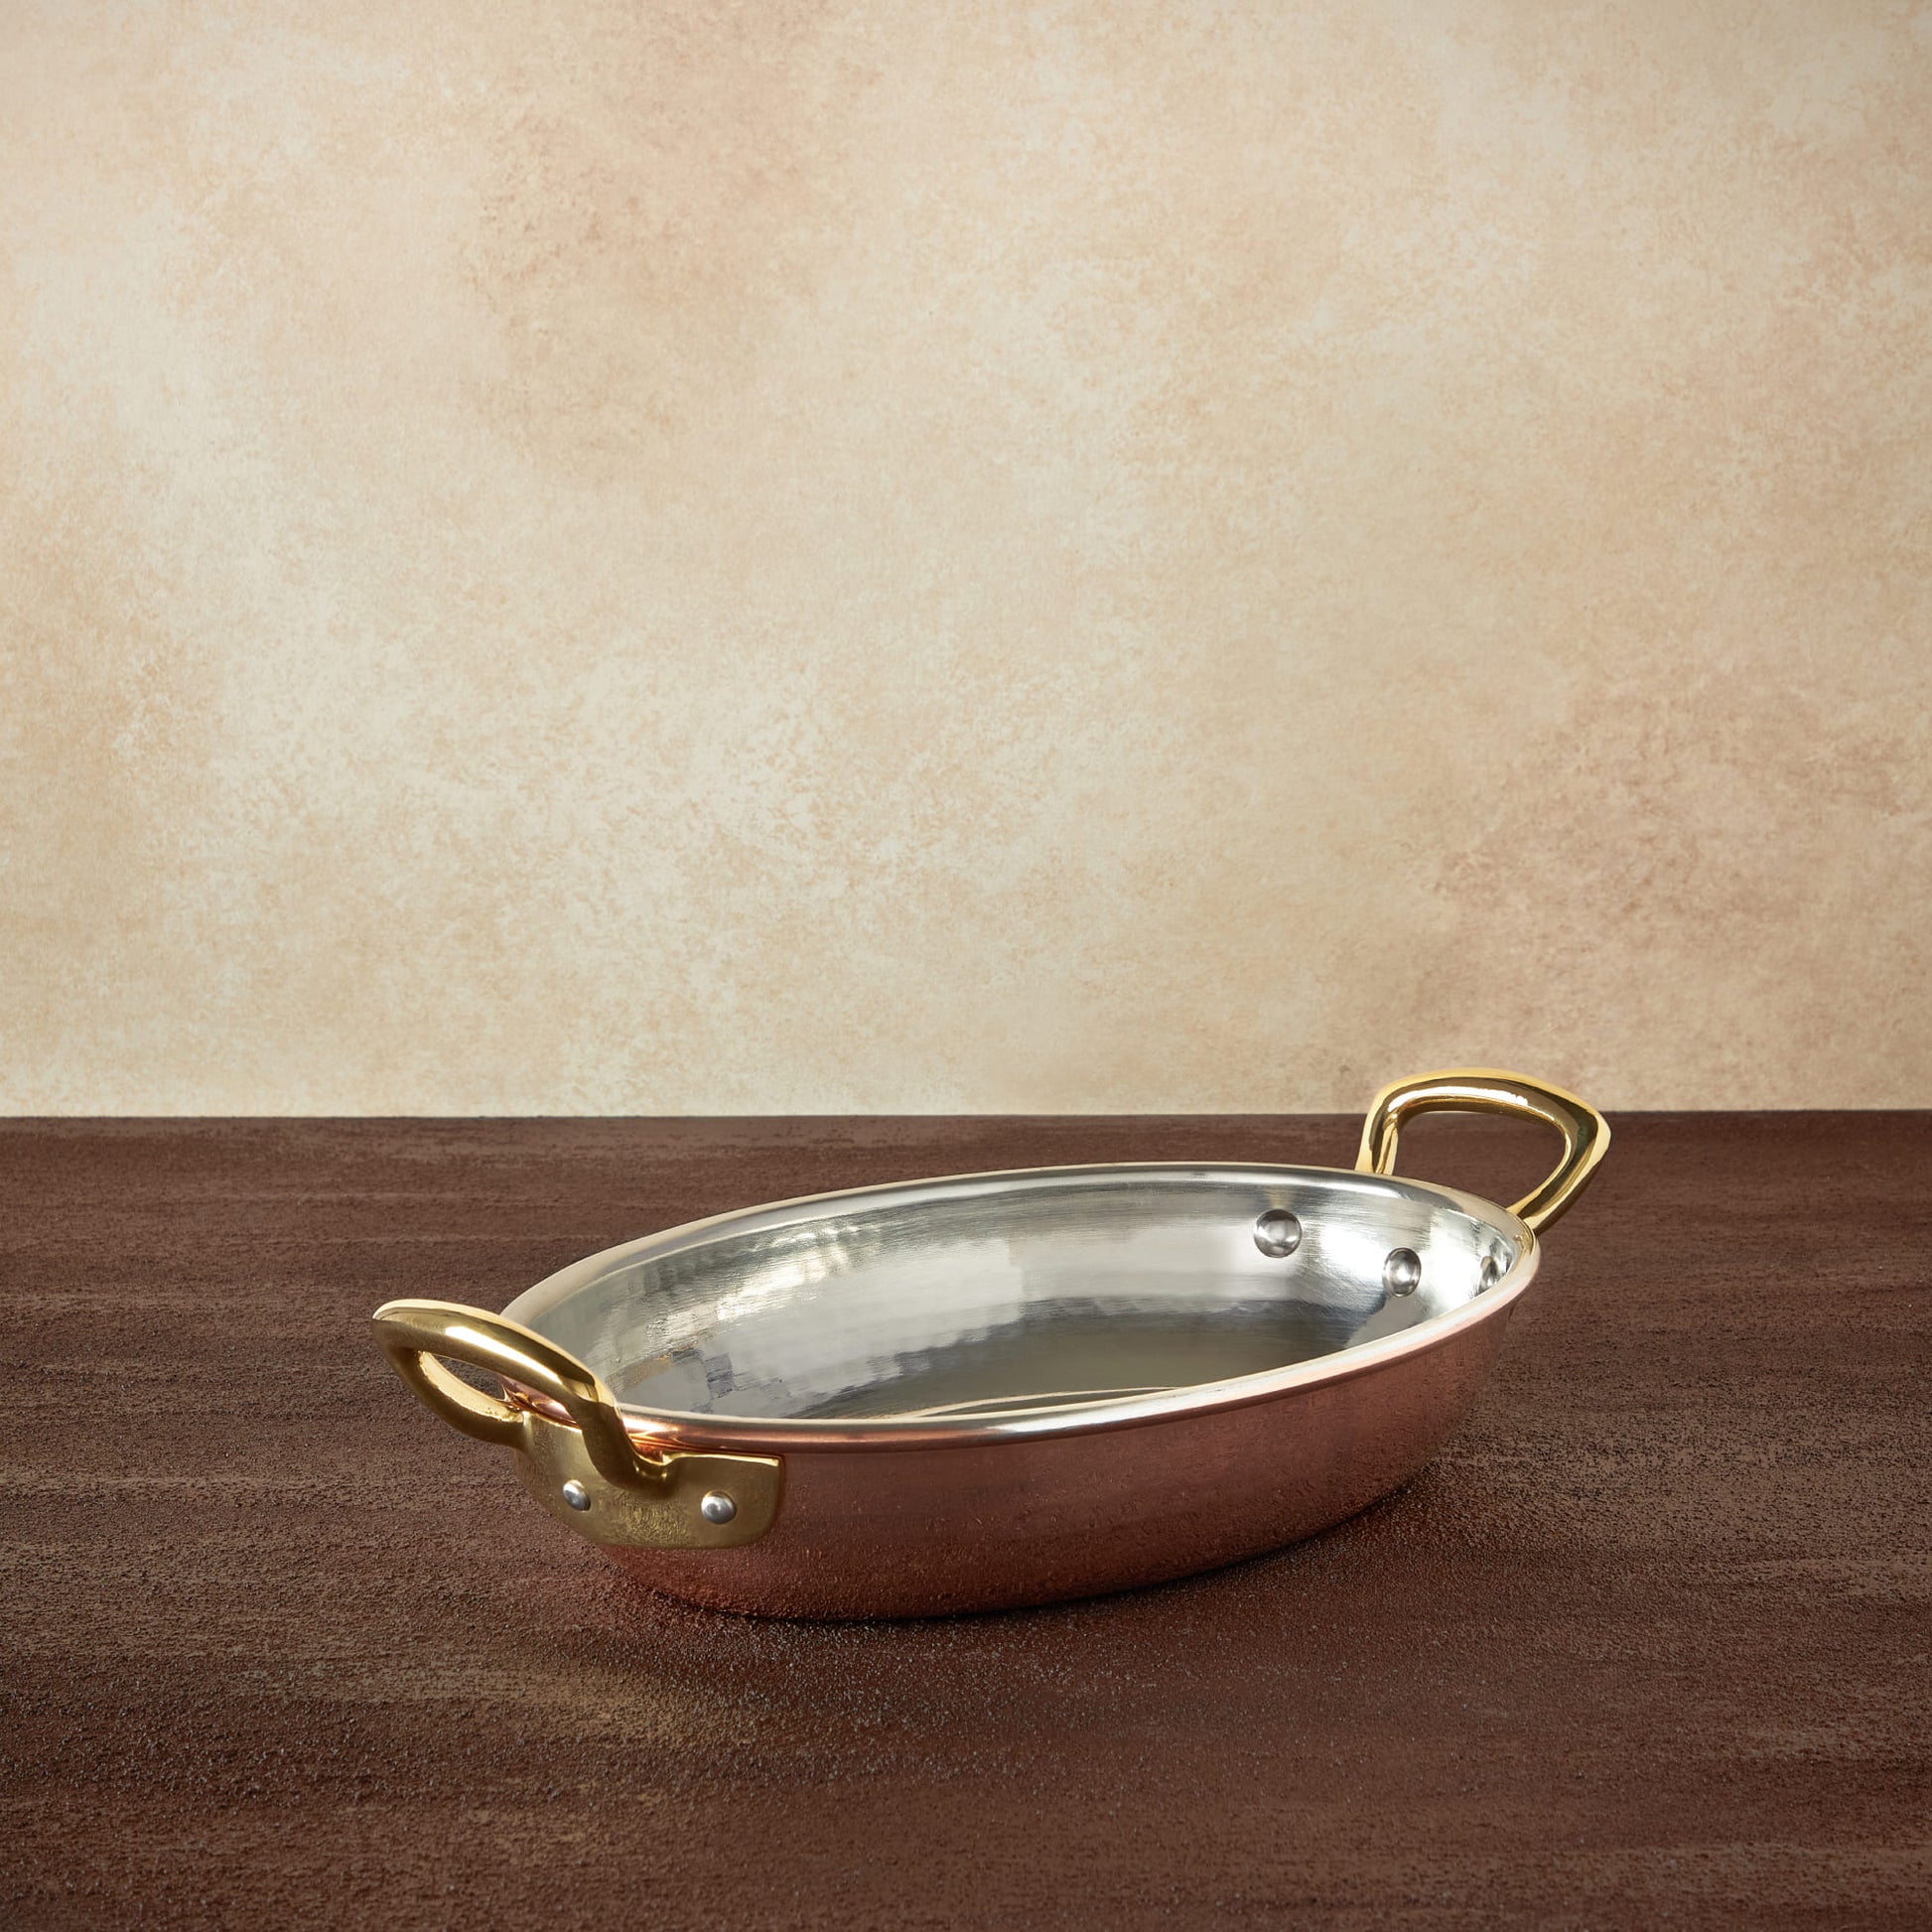 Hammered copper 11" Covered Oval Gratin lined with high purity tin applied by hand over fire and bronze handles, from Ruffoni Historia collection